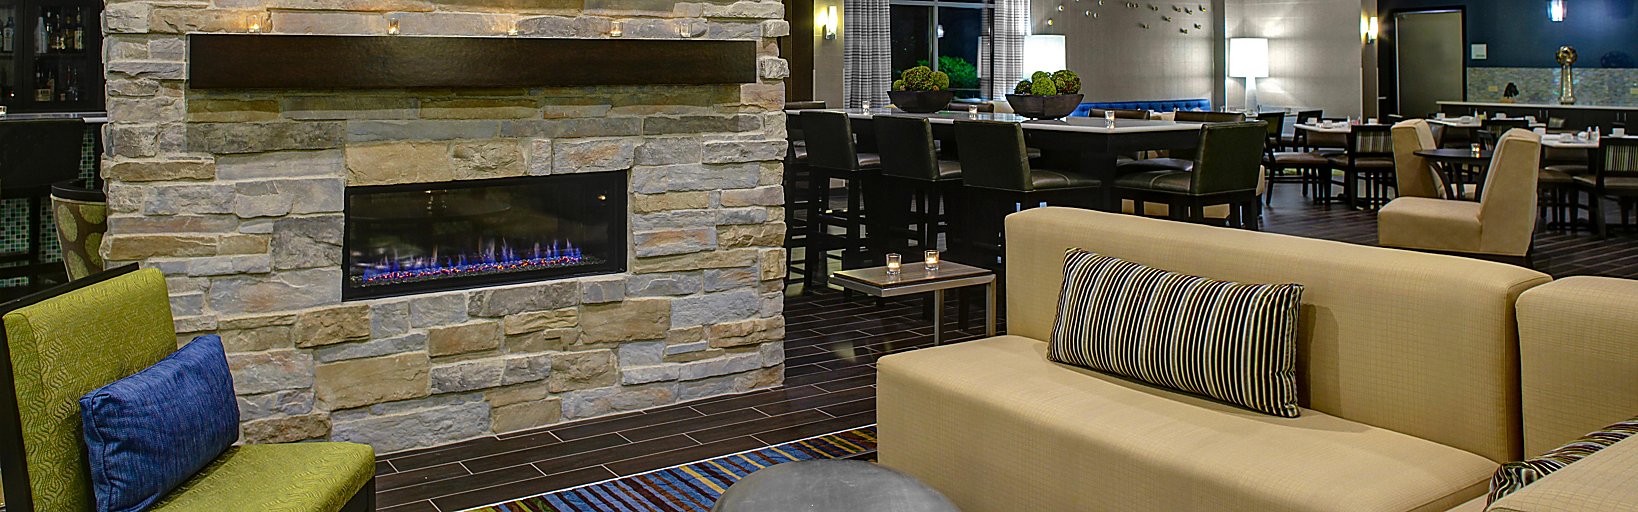 Kid Friendly Hotel With Indoor Pool Holiday Inn Indianapolis Carmel